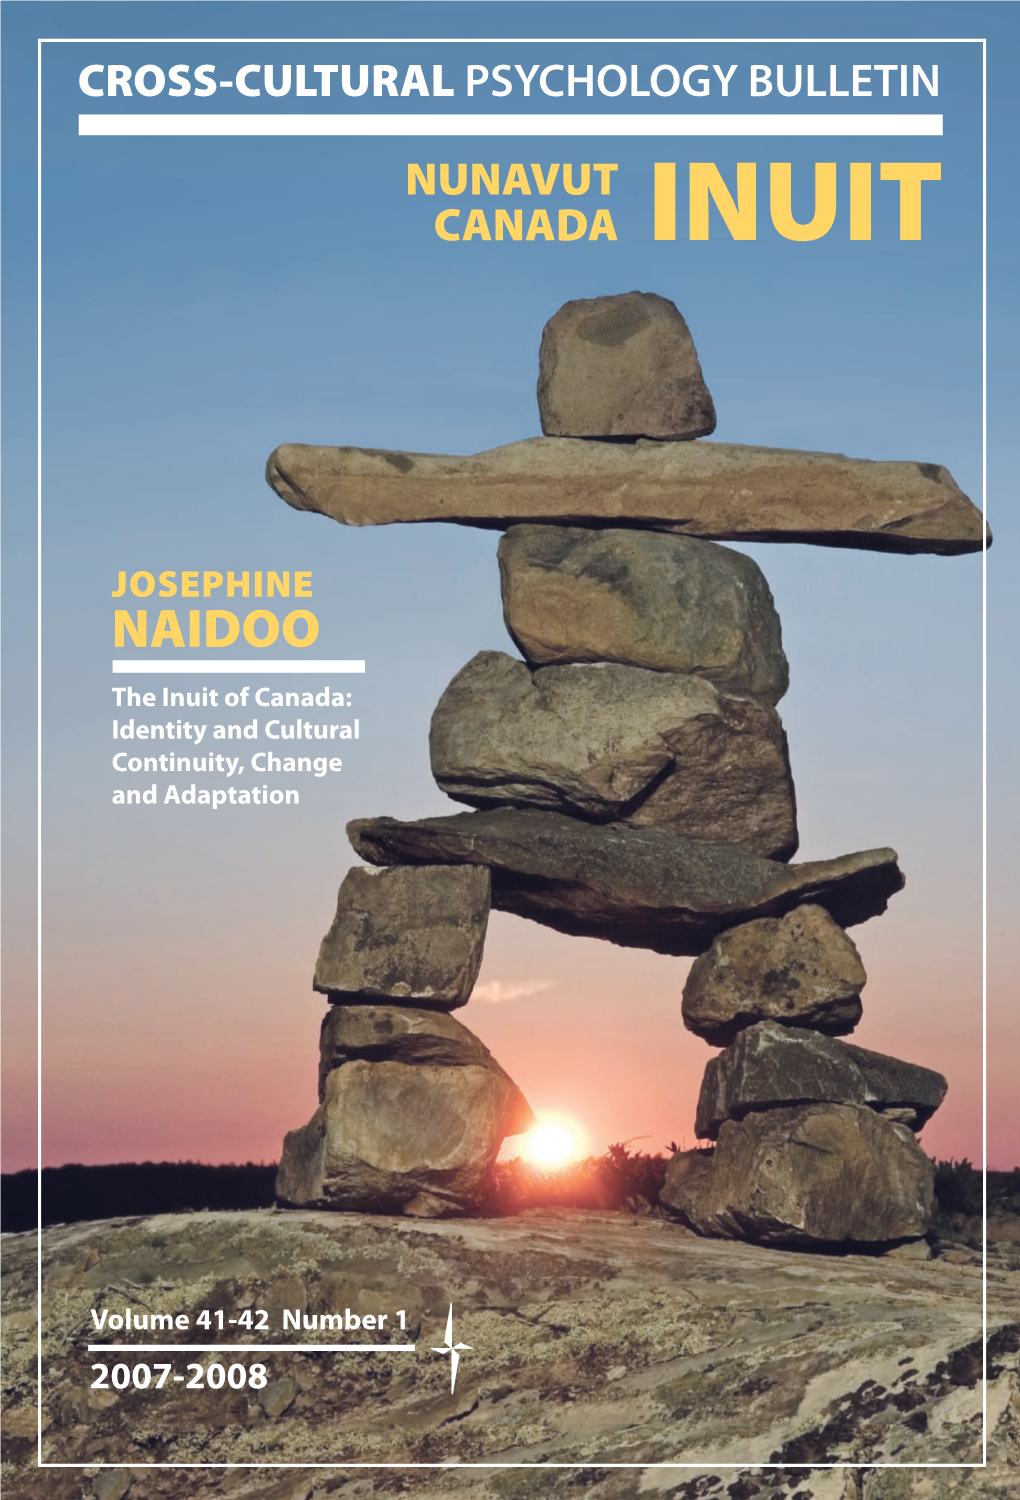 NAIDOO the Inuit of Canada: Identity and Cultural Continuity, Change and Adaptation